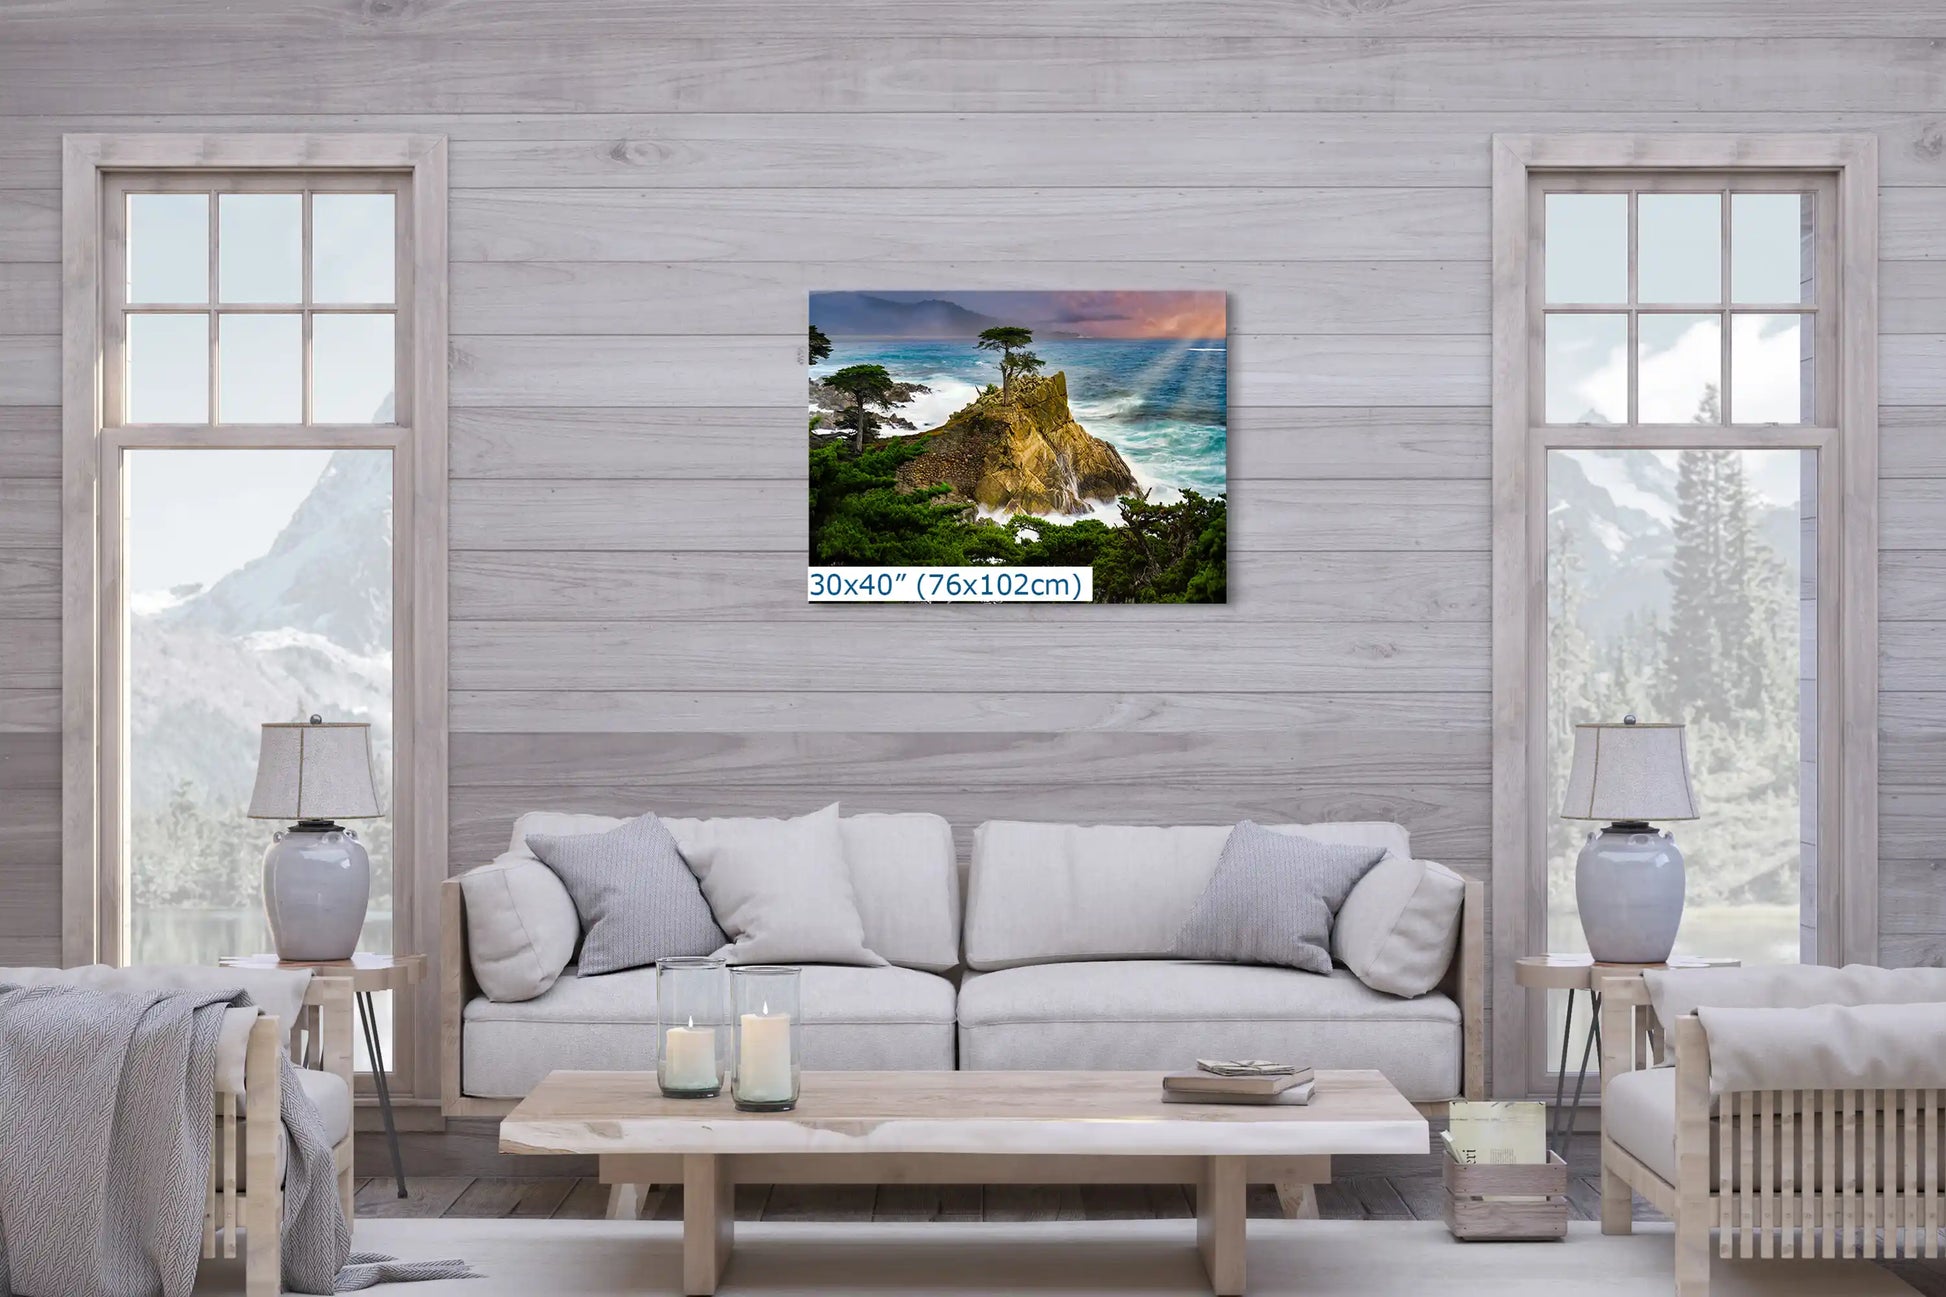 Lone Cypress Photograph Wall Decor shown in 30x40 over a living room couch